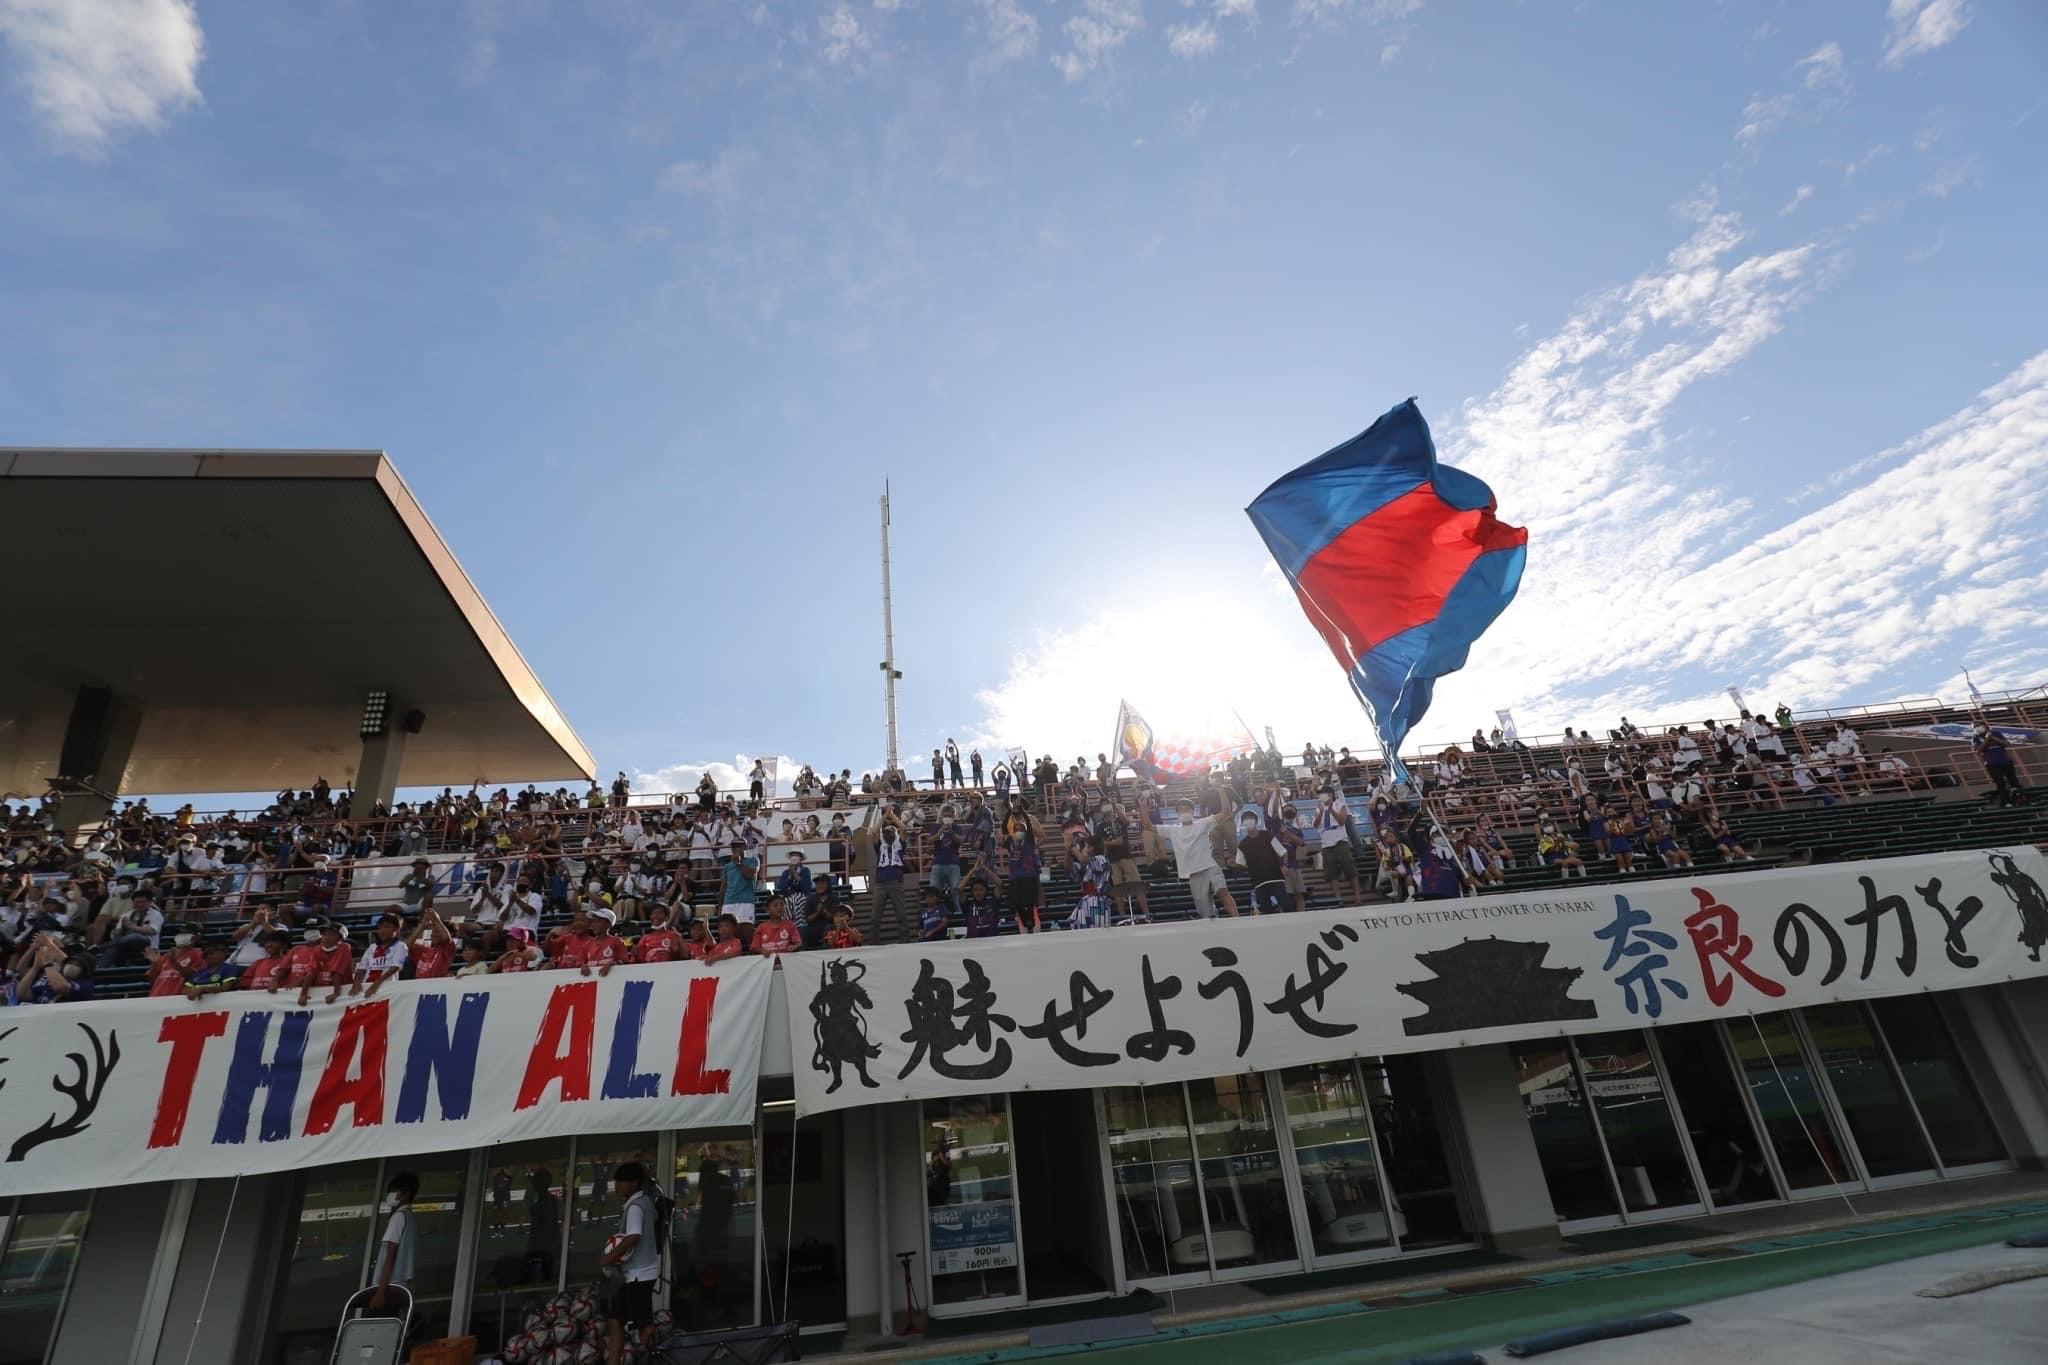 Nara supporters during a match